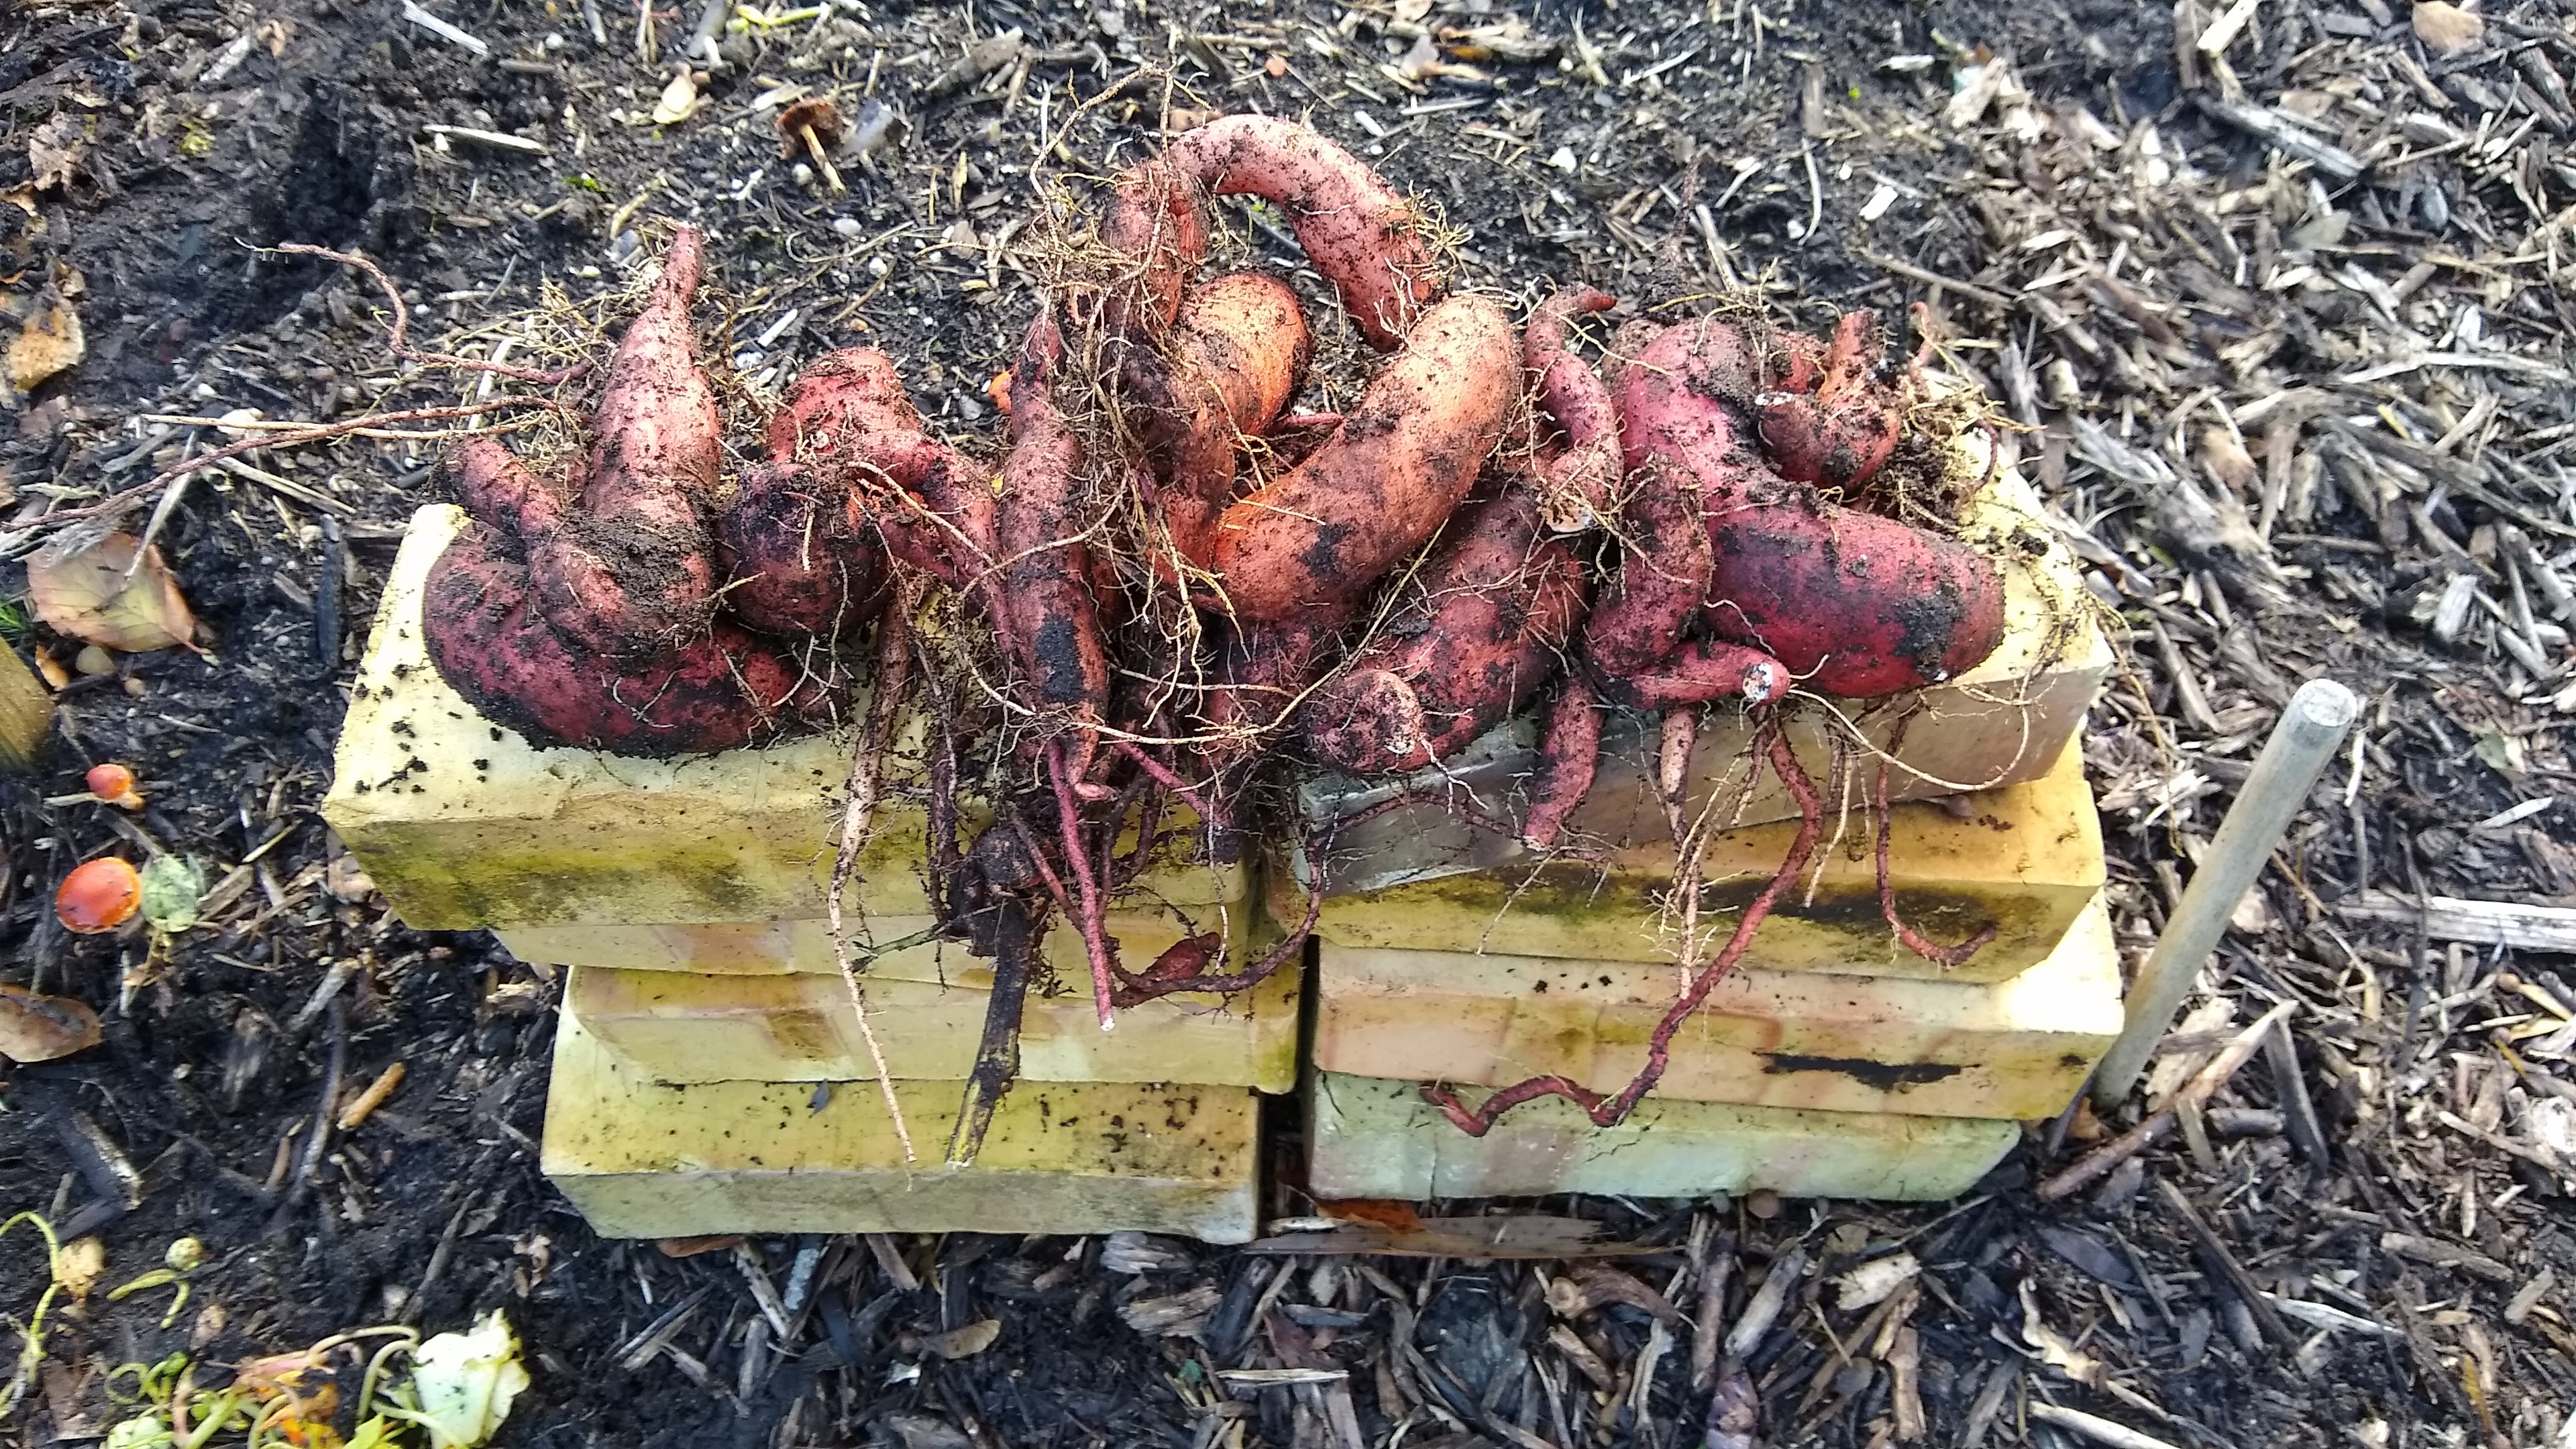 sweat potato tubers on some bricks for scale